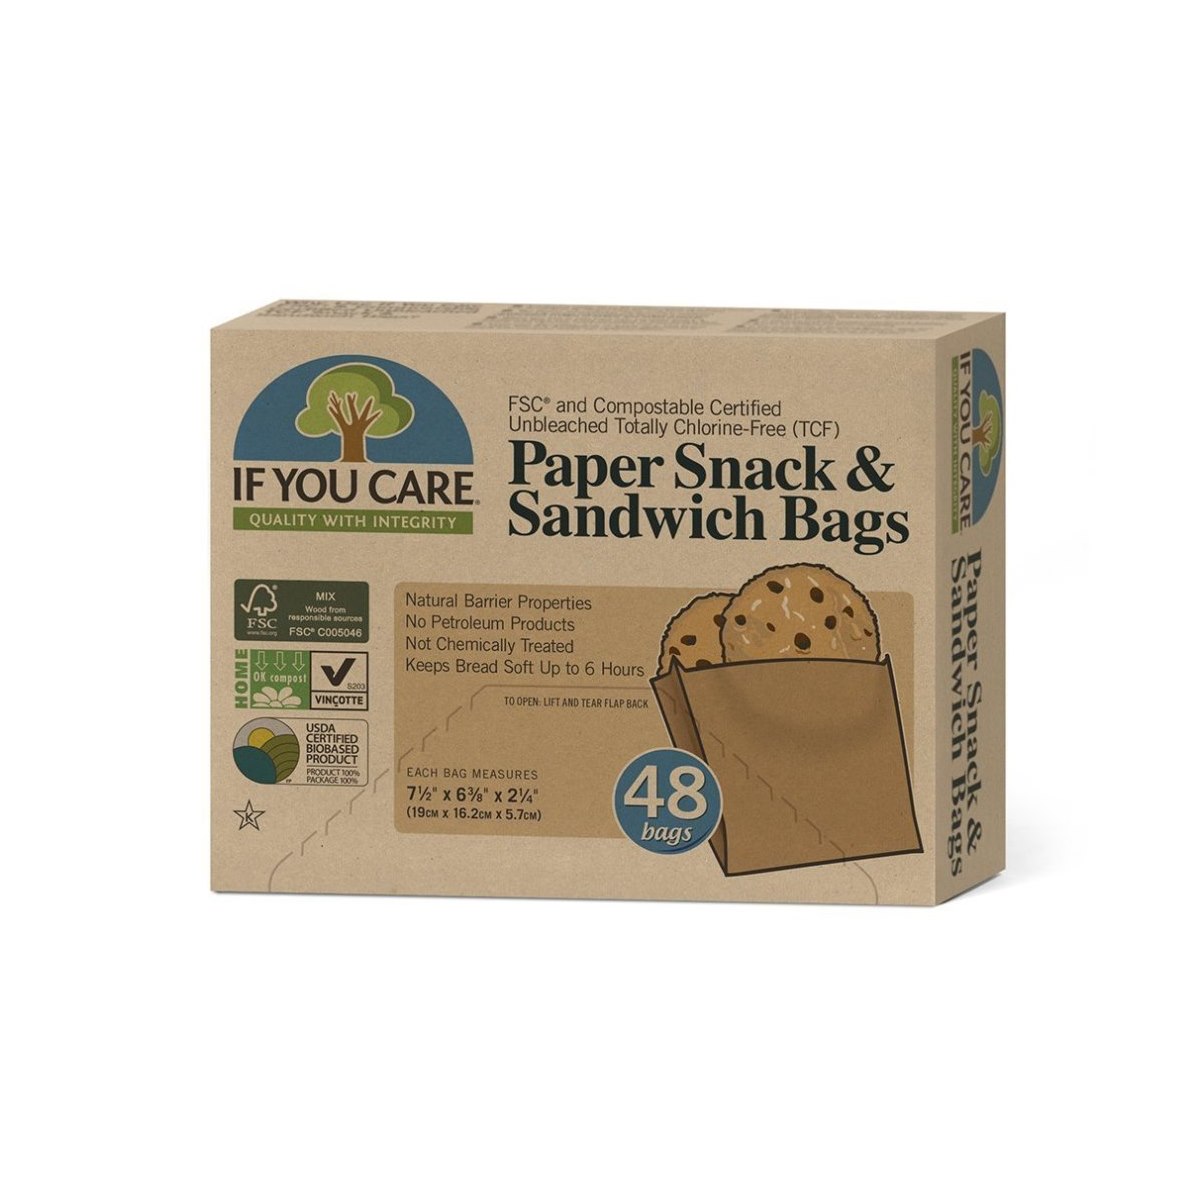 If You Care 48 Paper Snack and Sandwich Bags